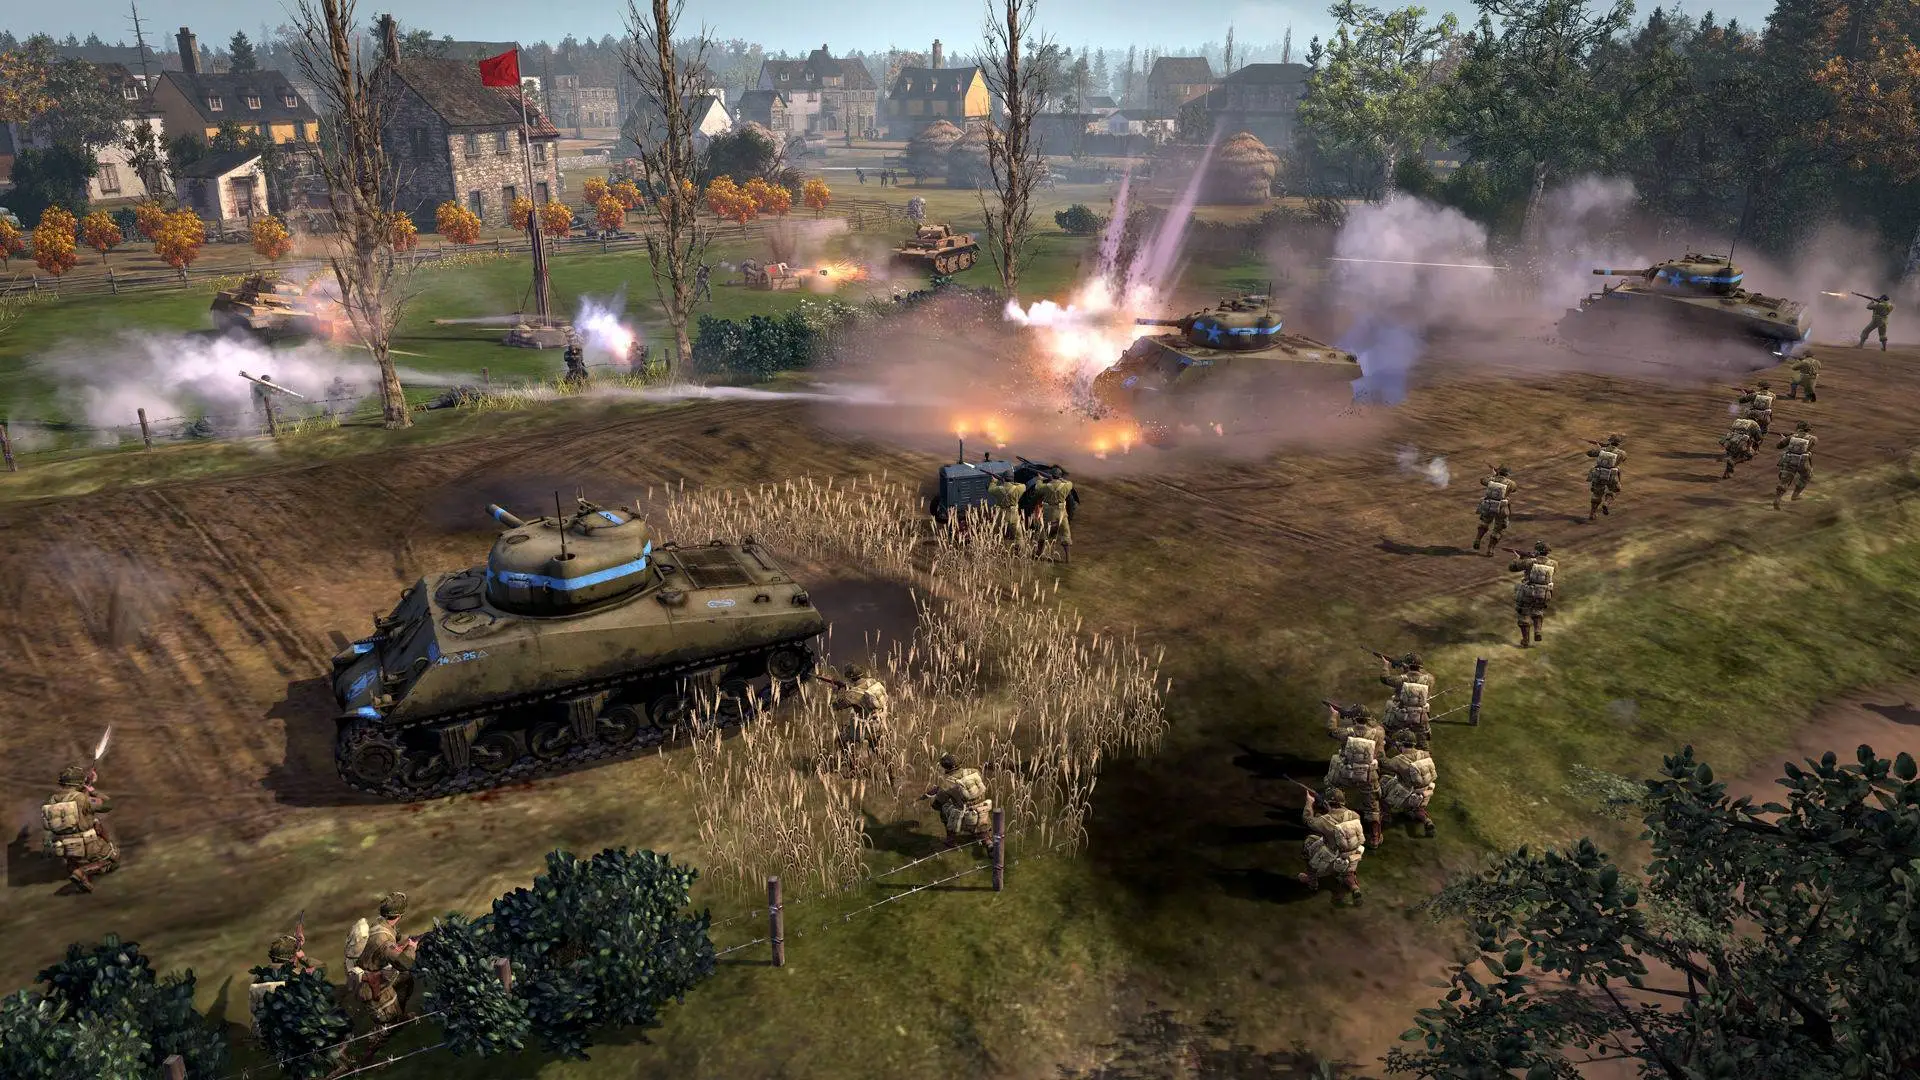 company of heroes 2 master collection crack